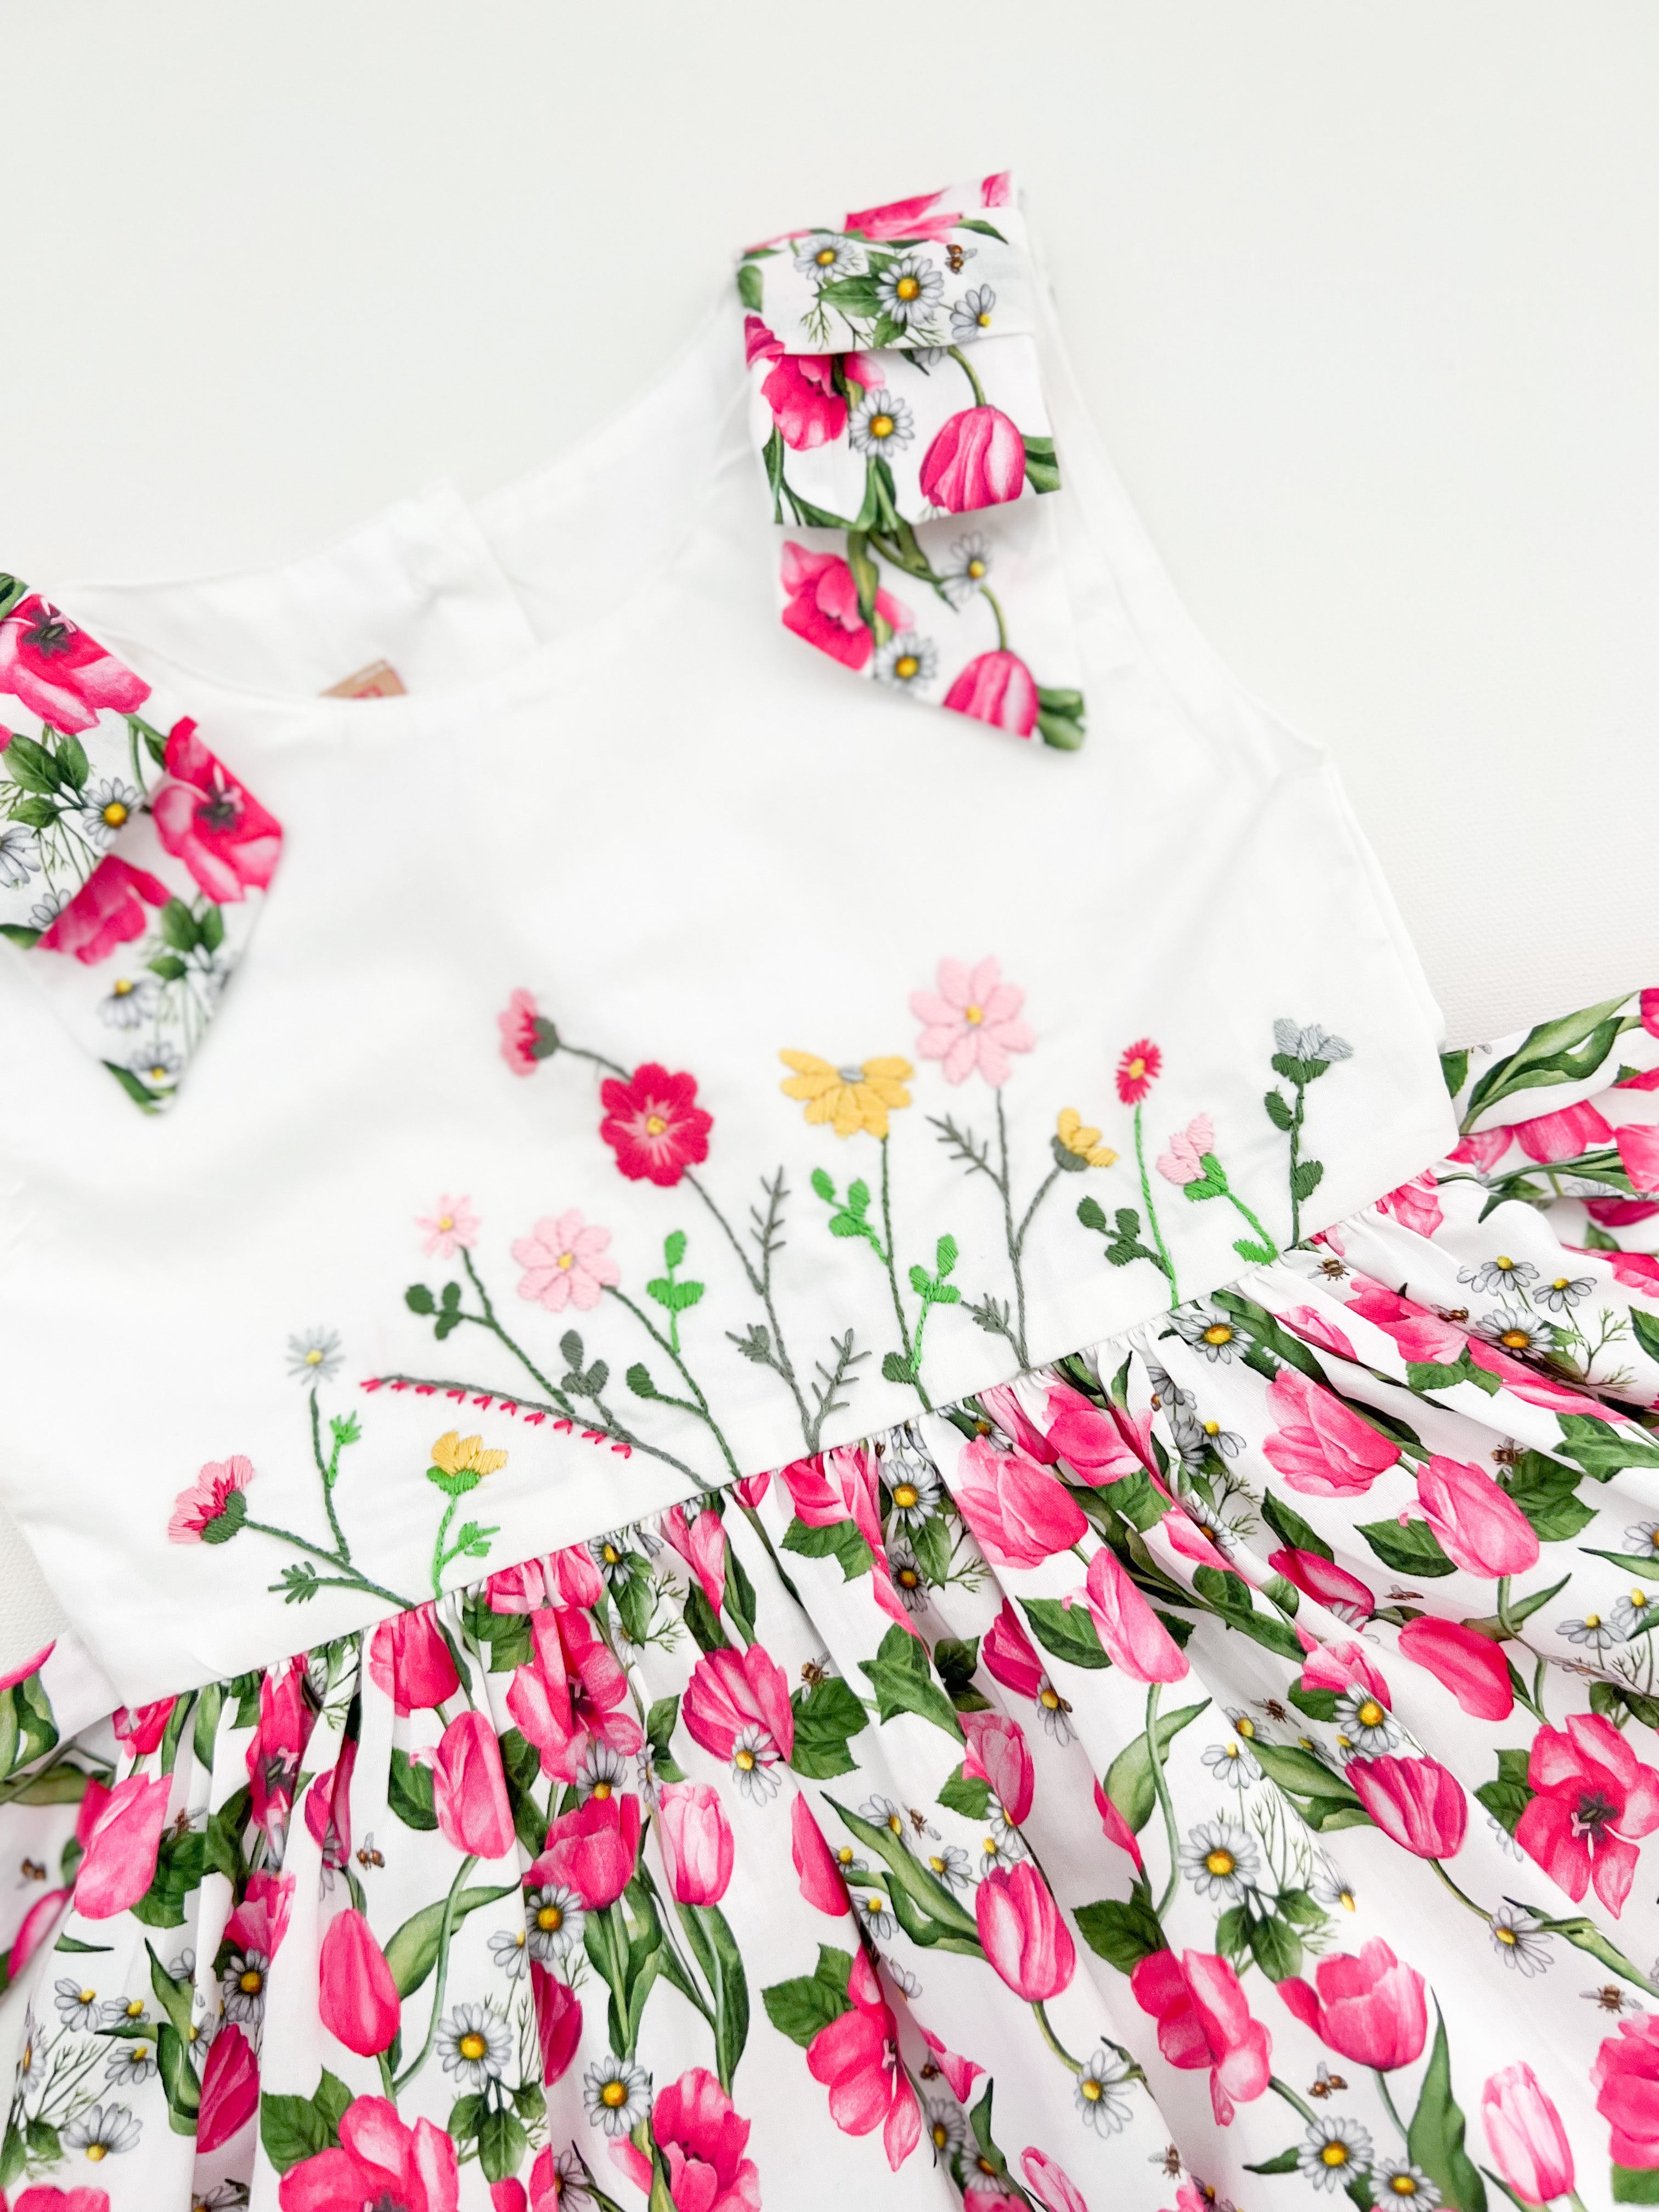 ** SECONDS SALE ** The hand embroidered ALMA dress - Floral fuschia